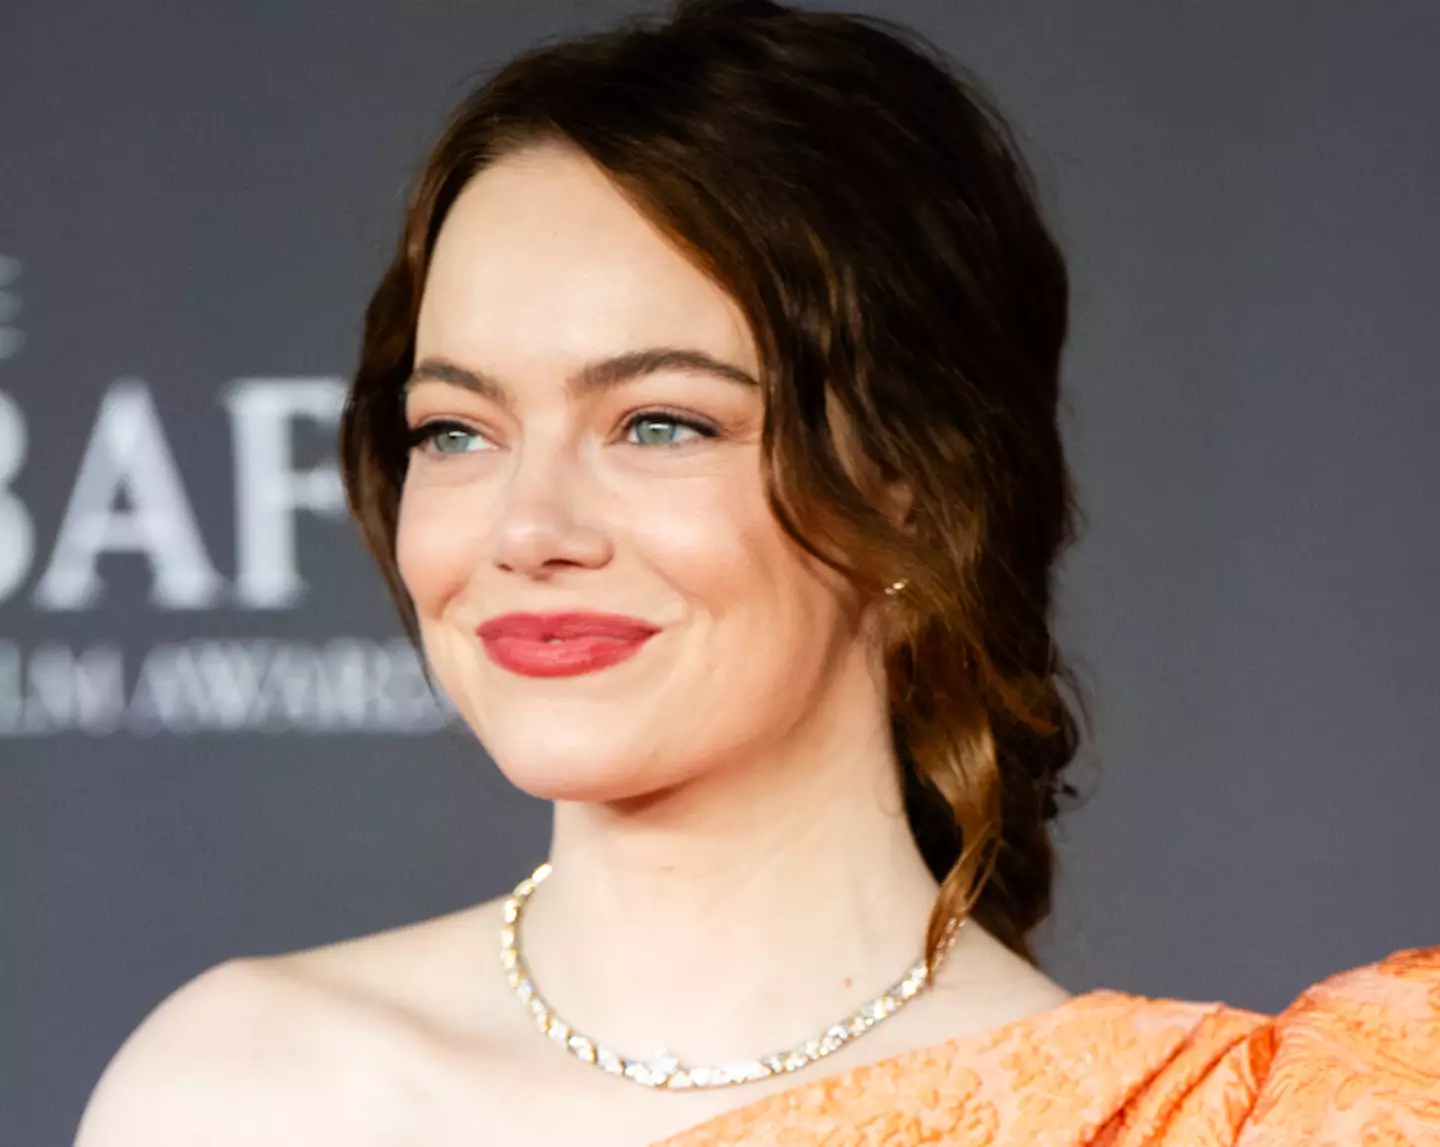 Emma Stone worked with the director to perfect the character of Bella.